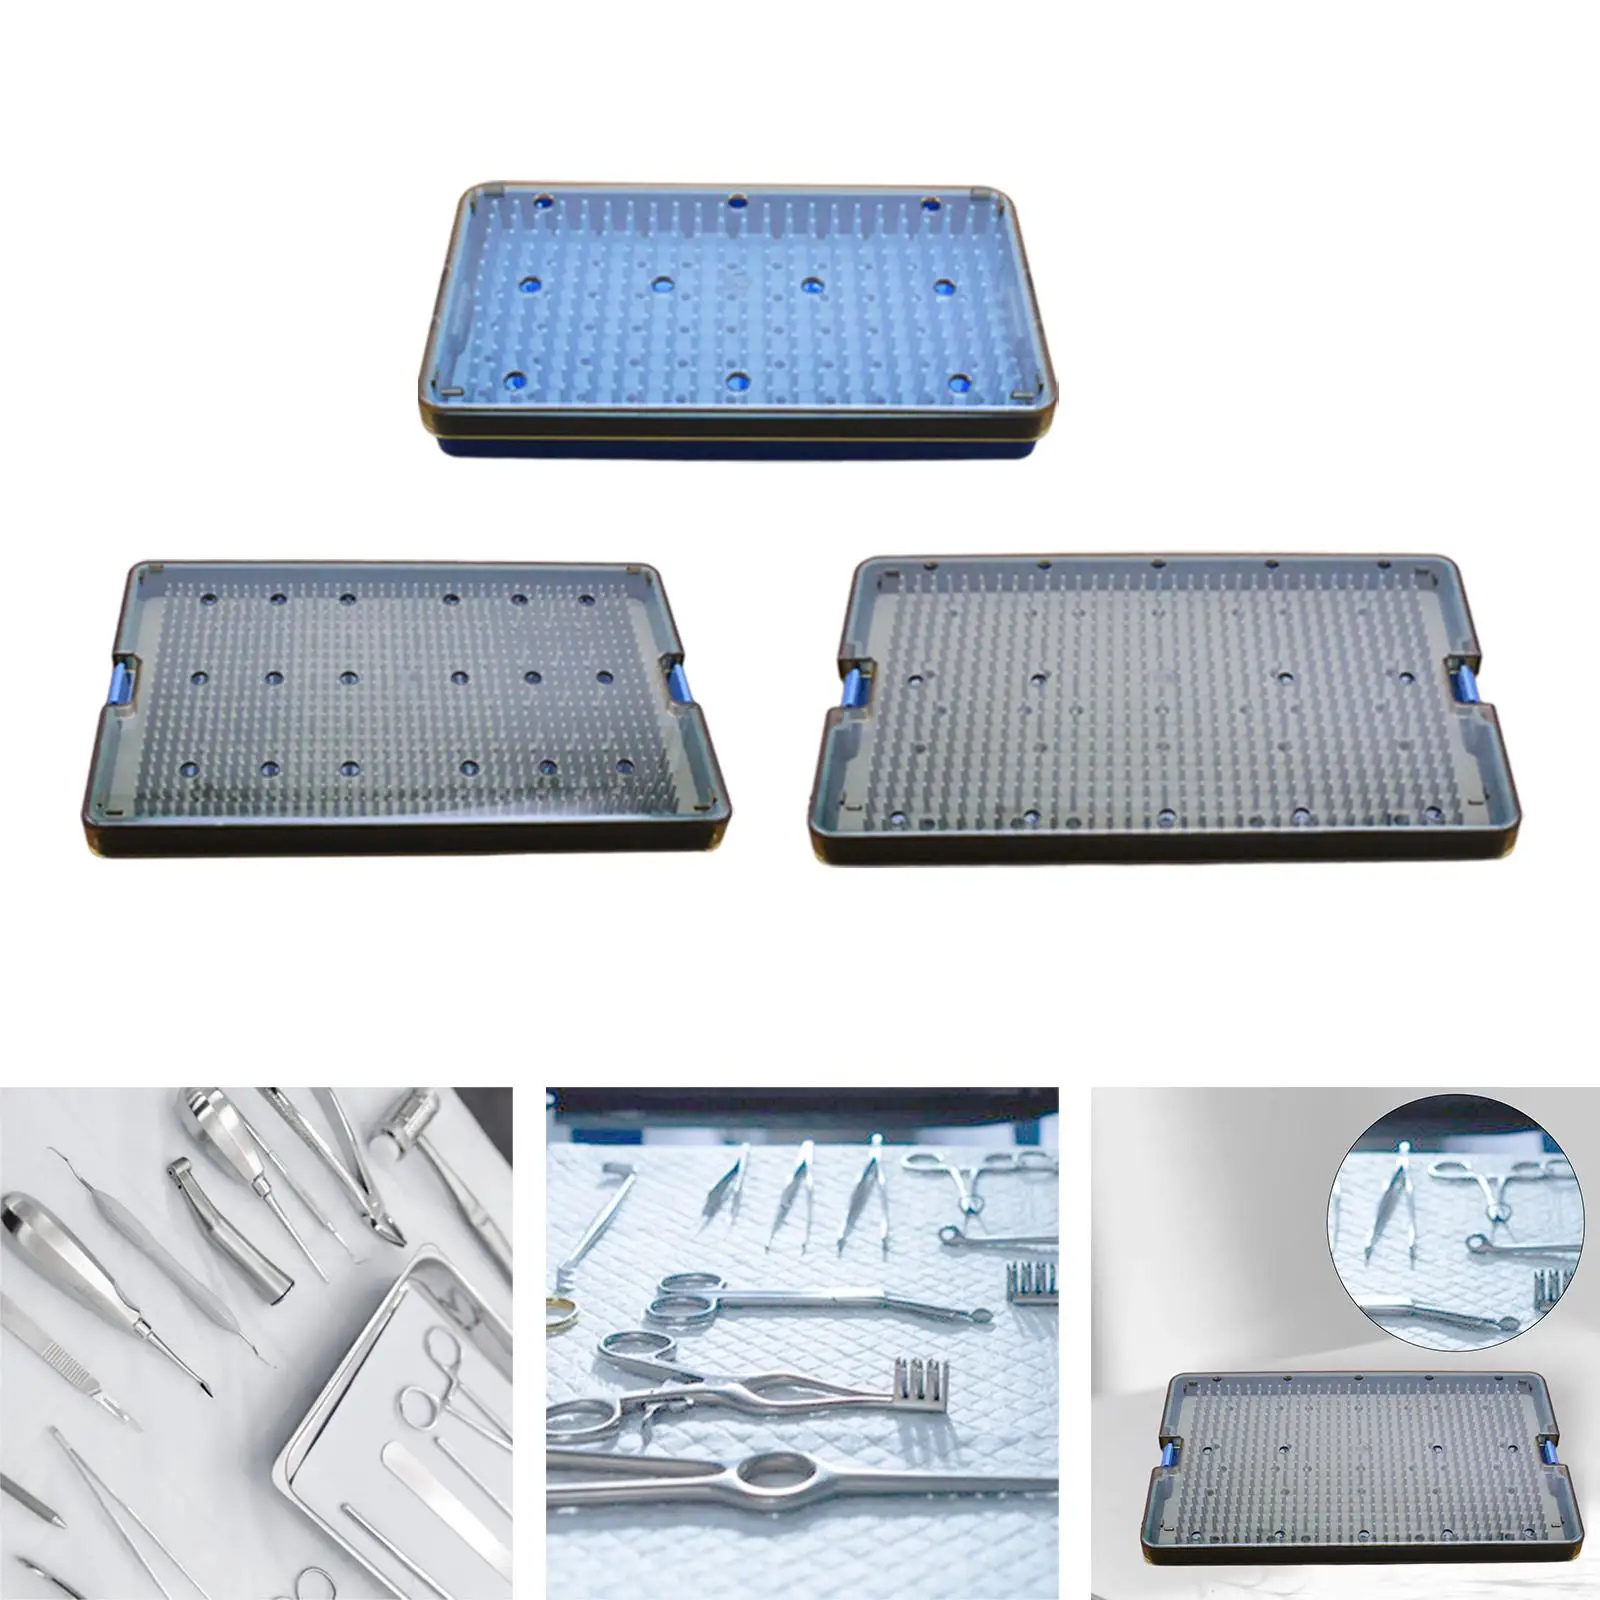 Silicone Sterilization Cassette Autoclavable Box Disinfection Case Easy to Clean Sterilization Tray for Eye Tools Ophthalmic